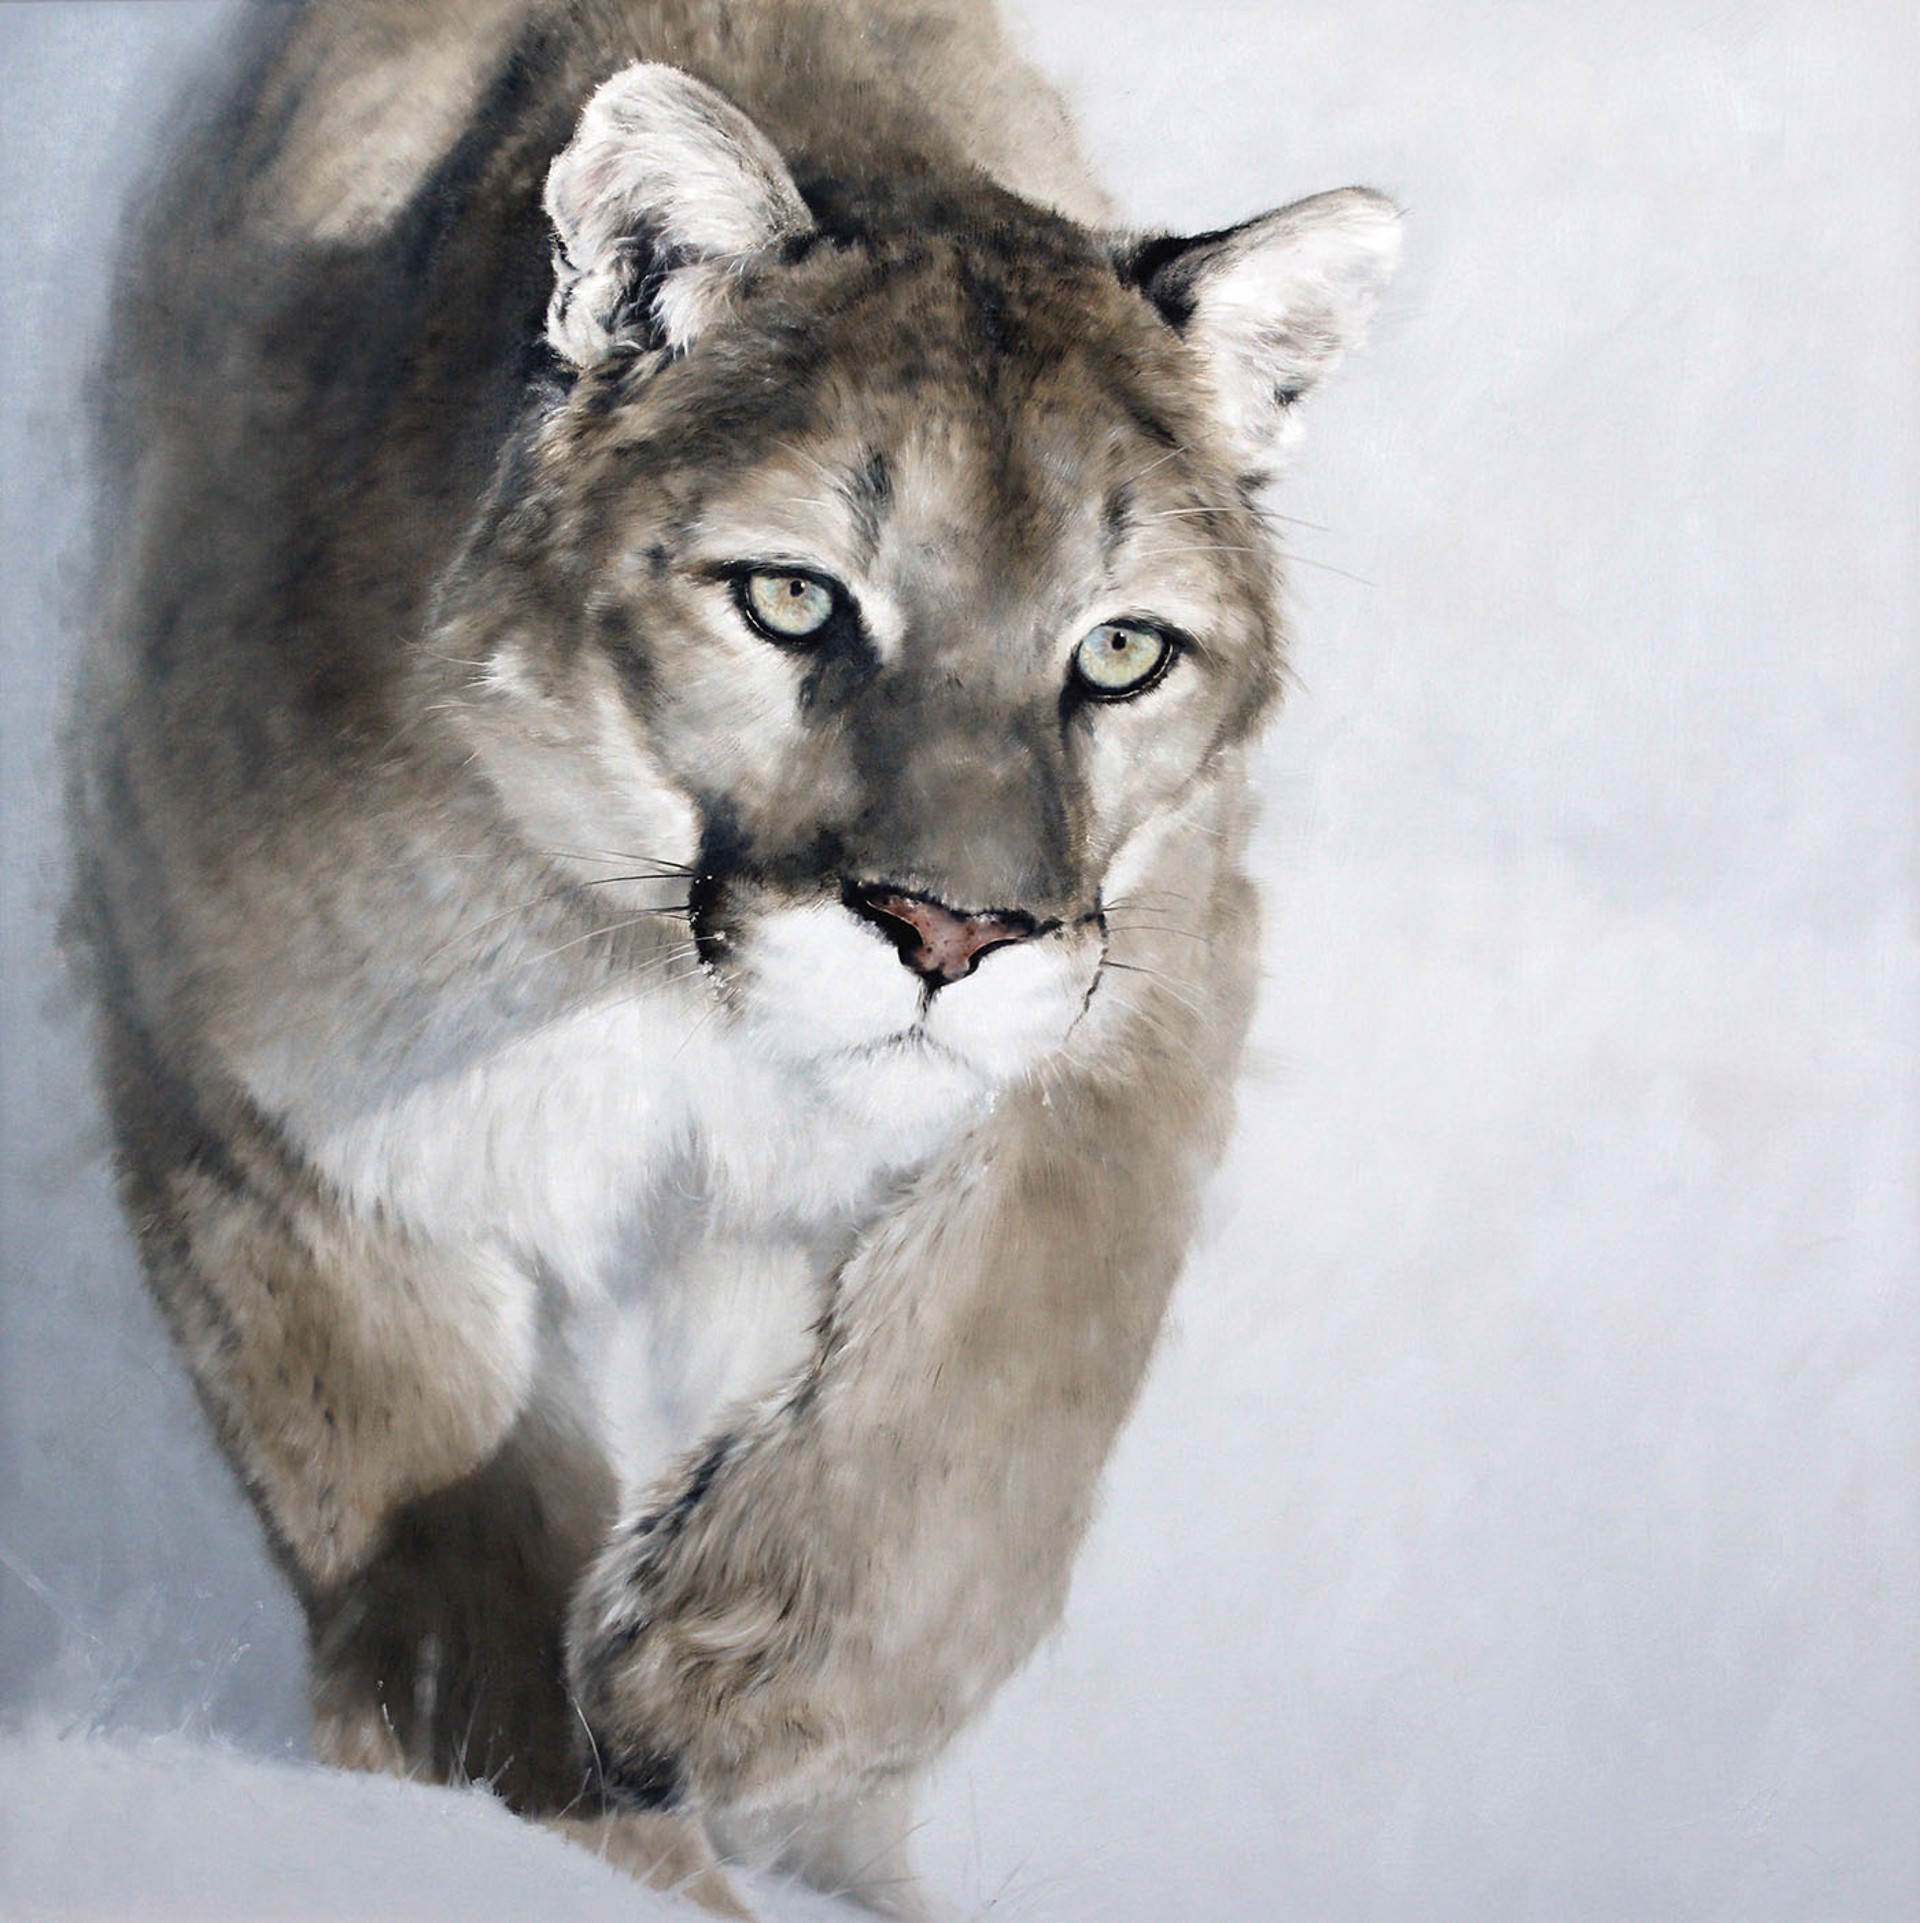 Original Oil Painting By Doyle Hostetler Featuring A Cougar Walking Forward From White Background 